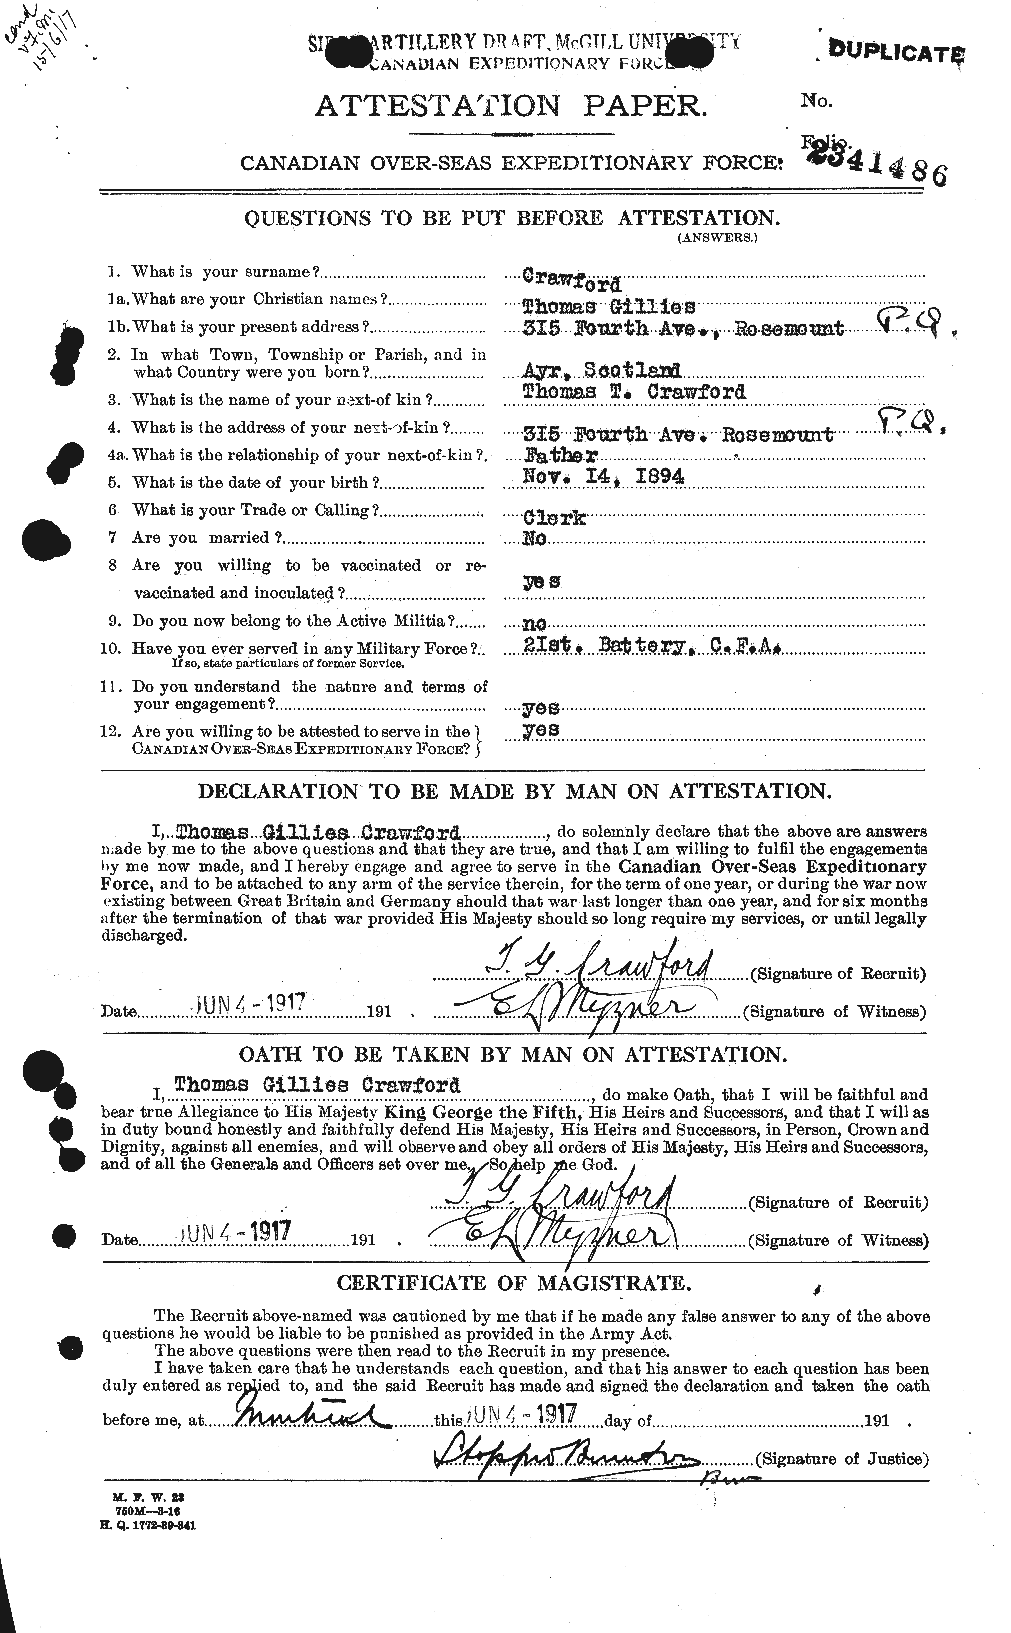 Personnel Records of the First World War - CEF 061353a